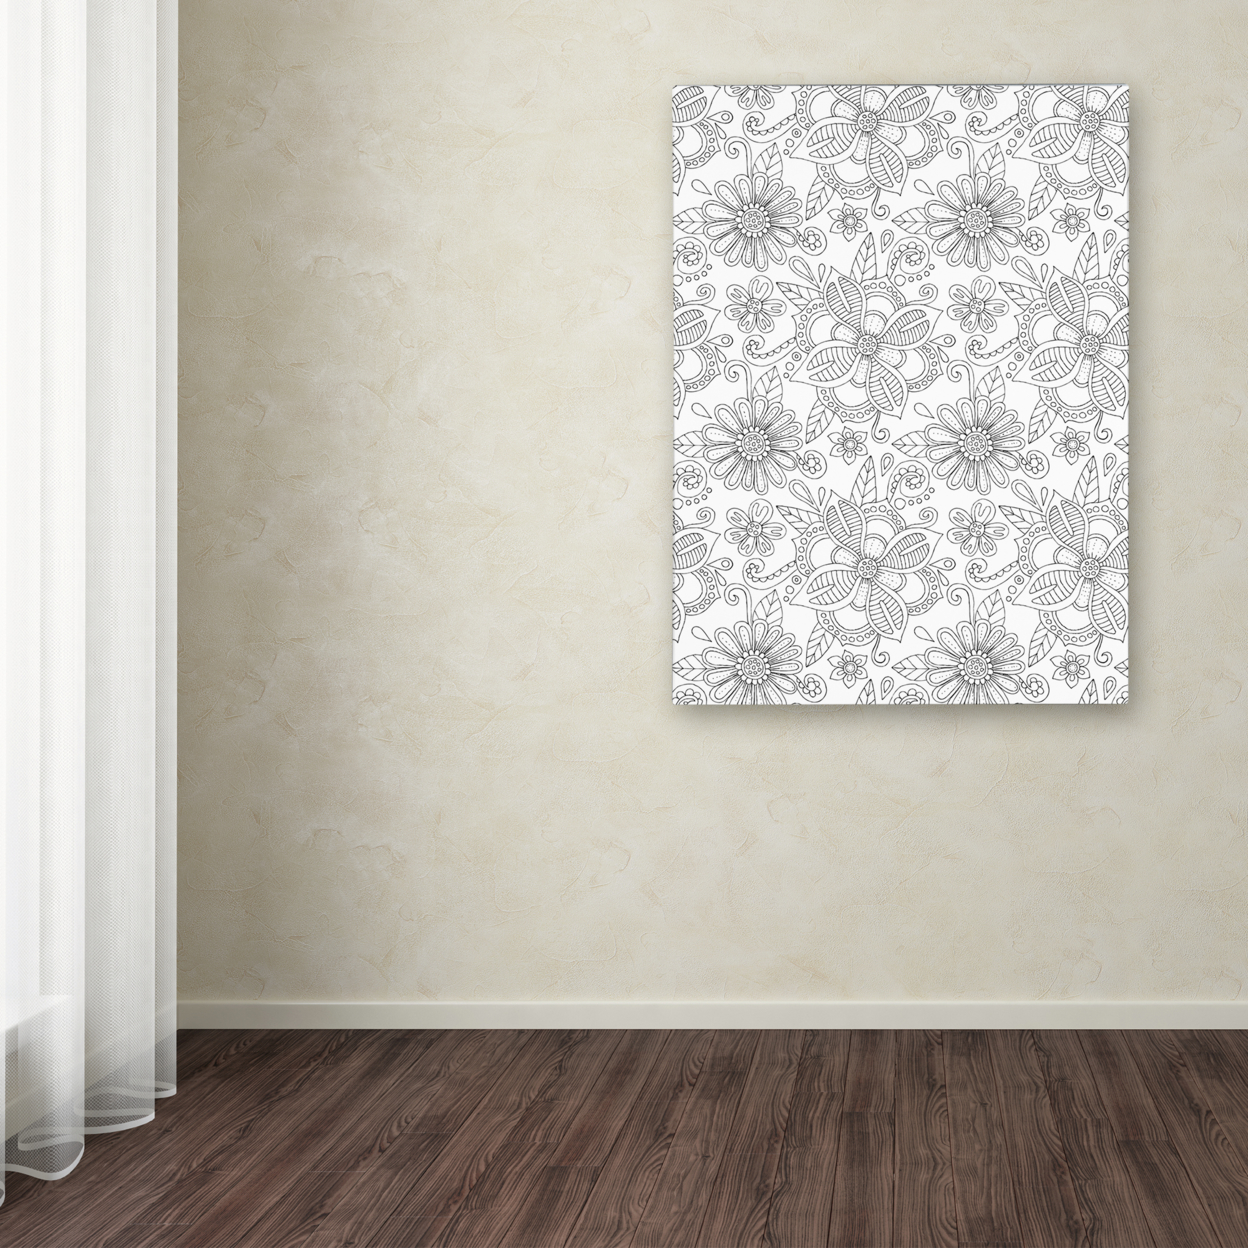 Hello Angel 'Big Beautiful Blossoms 10' Canvas Wall Art 35 X 47 Inches